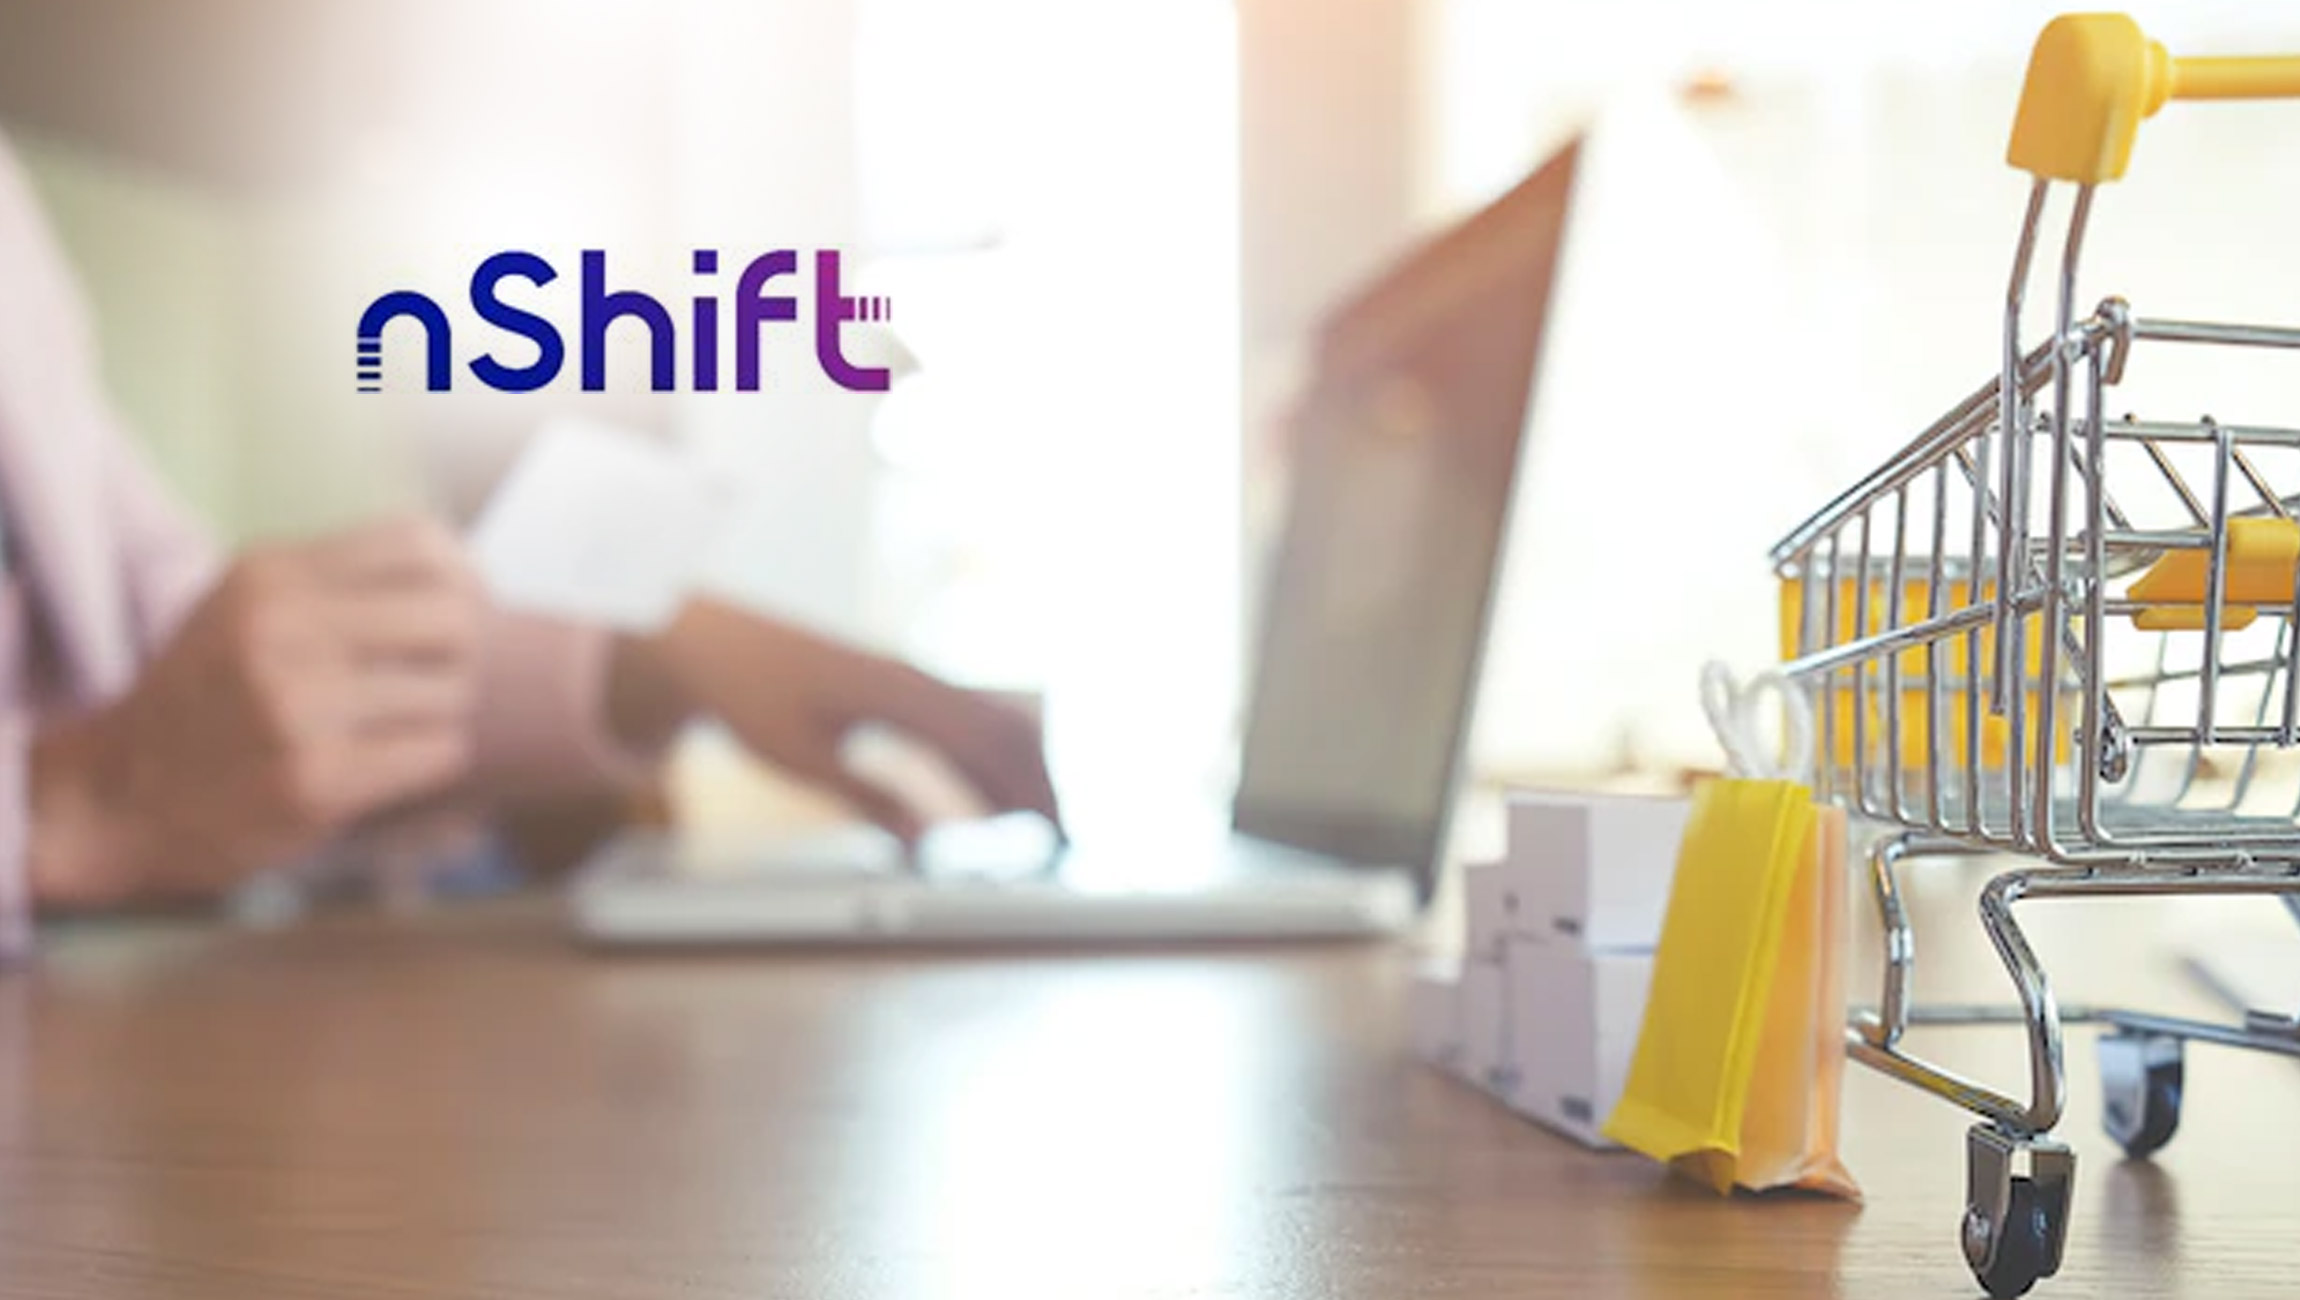 nShift-Branded-packaging-drives-recommendations-in-retail